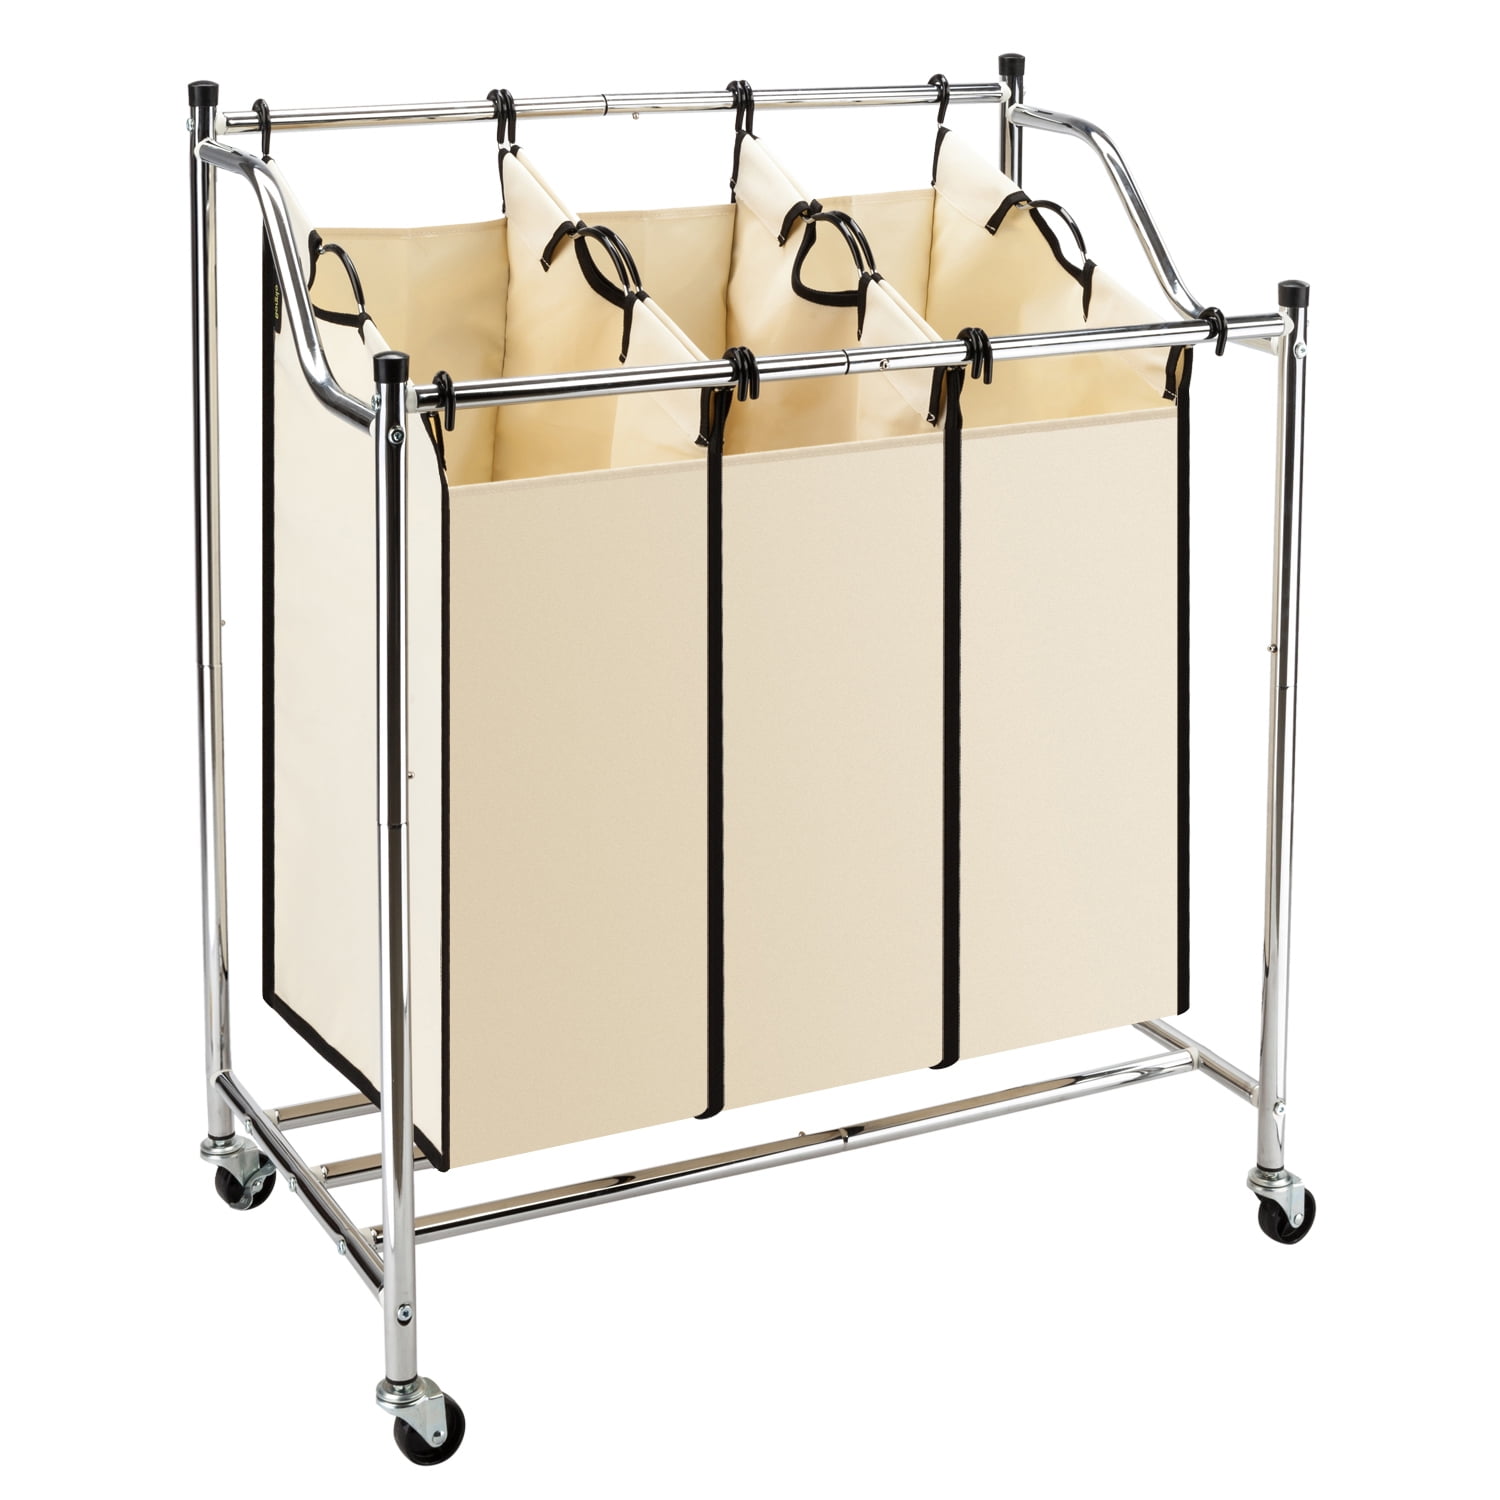 Bonnlo 3-Bag Laundry Sorter Cart on Wheels Heavy-Duty with Removable Bags, 